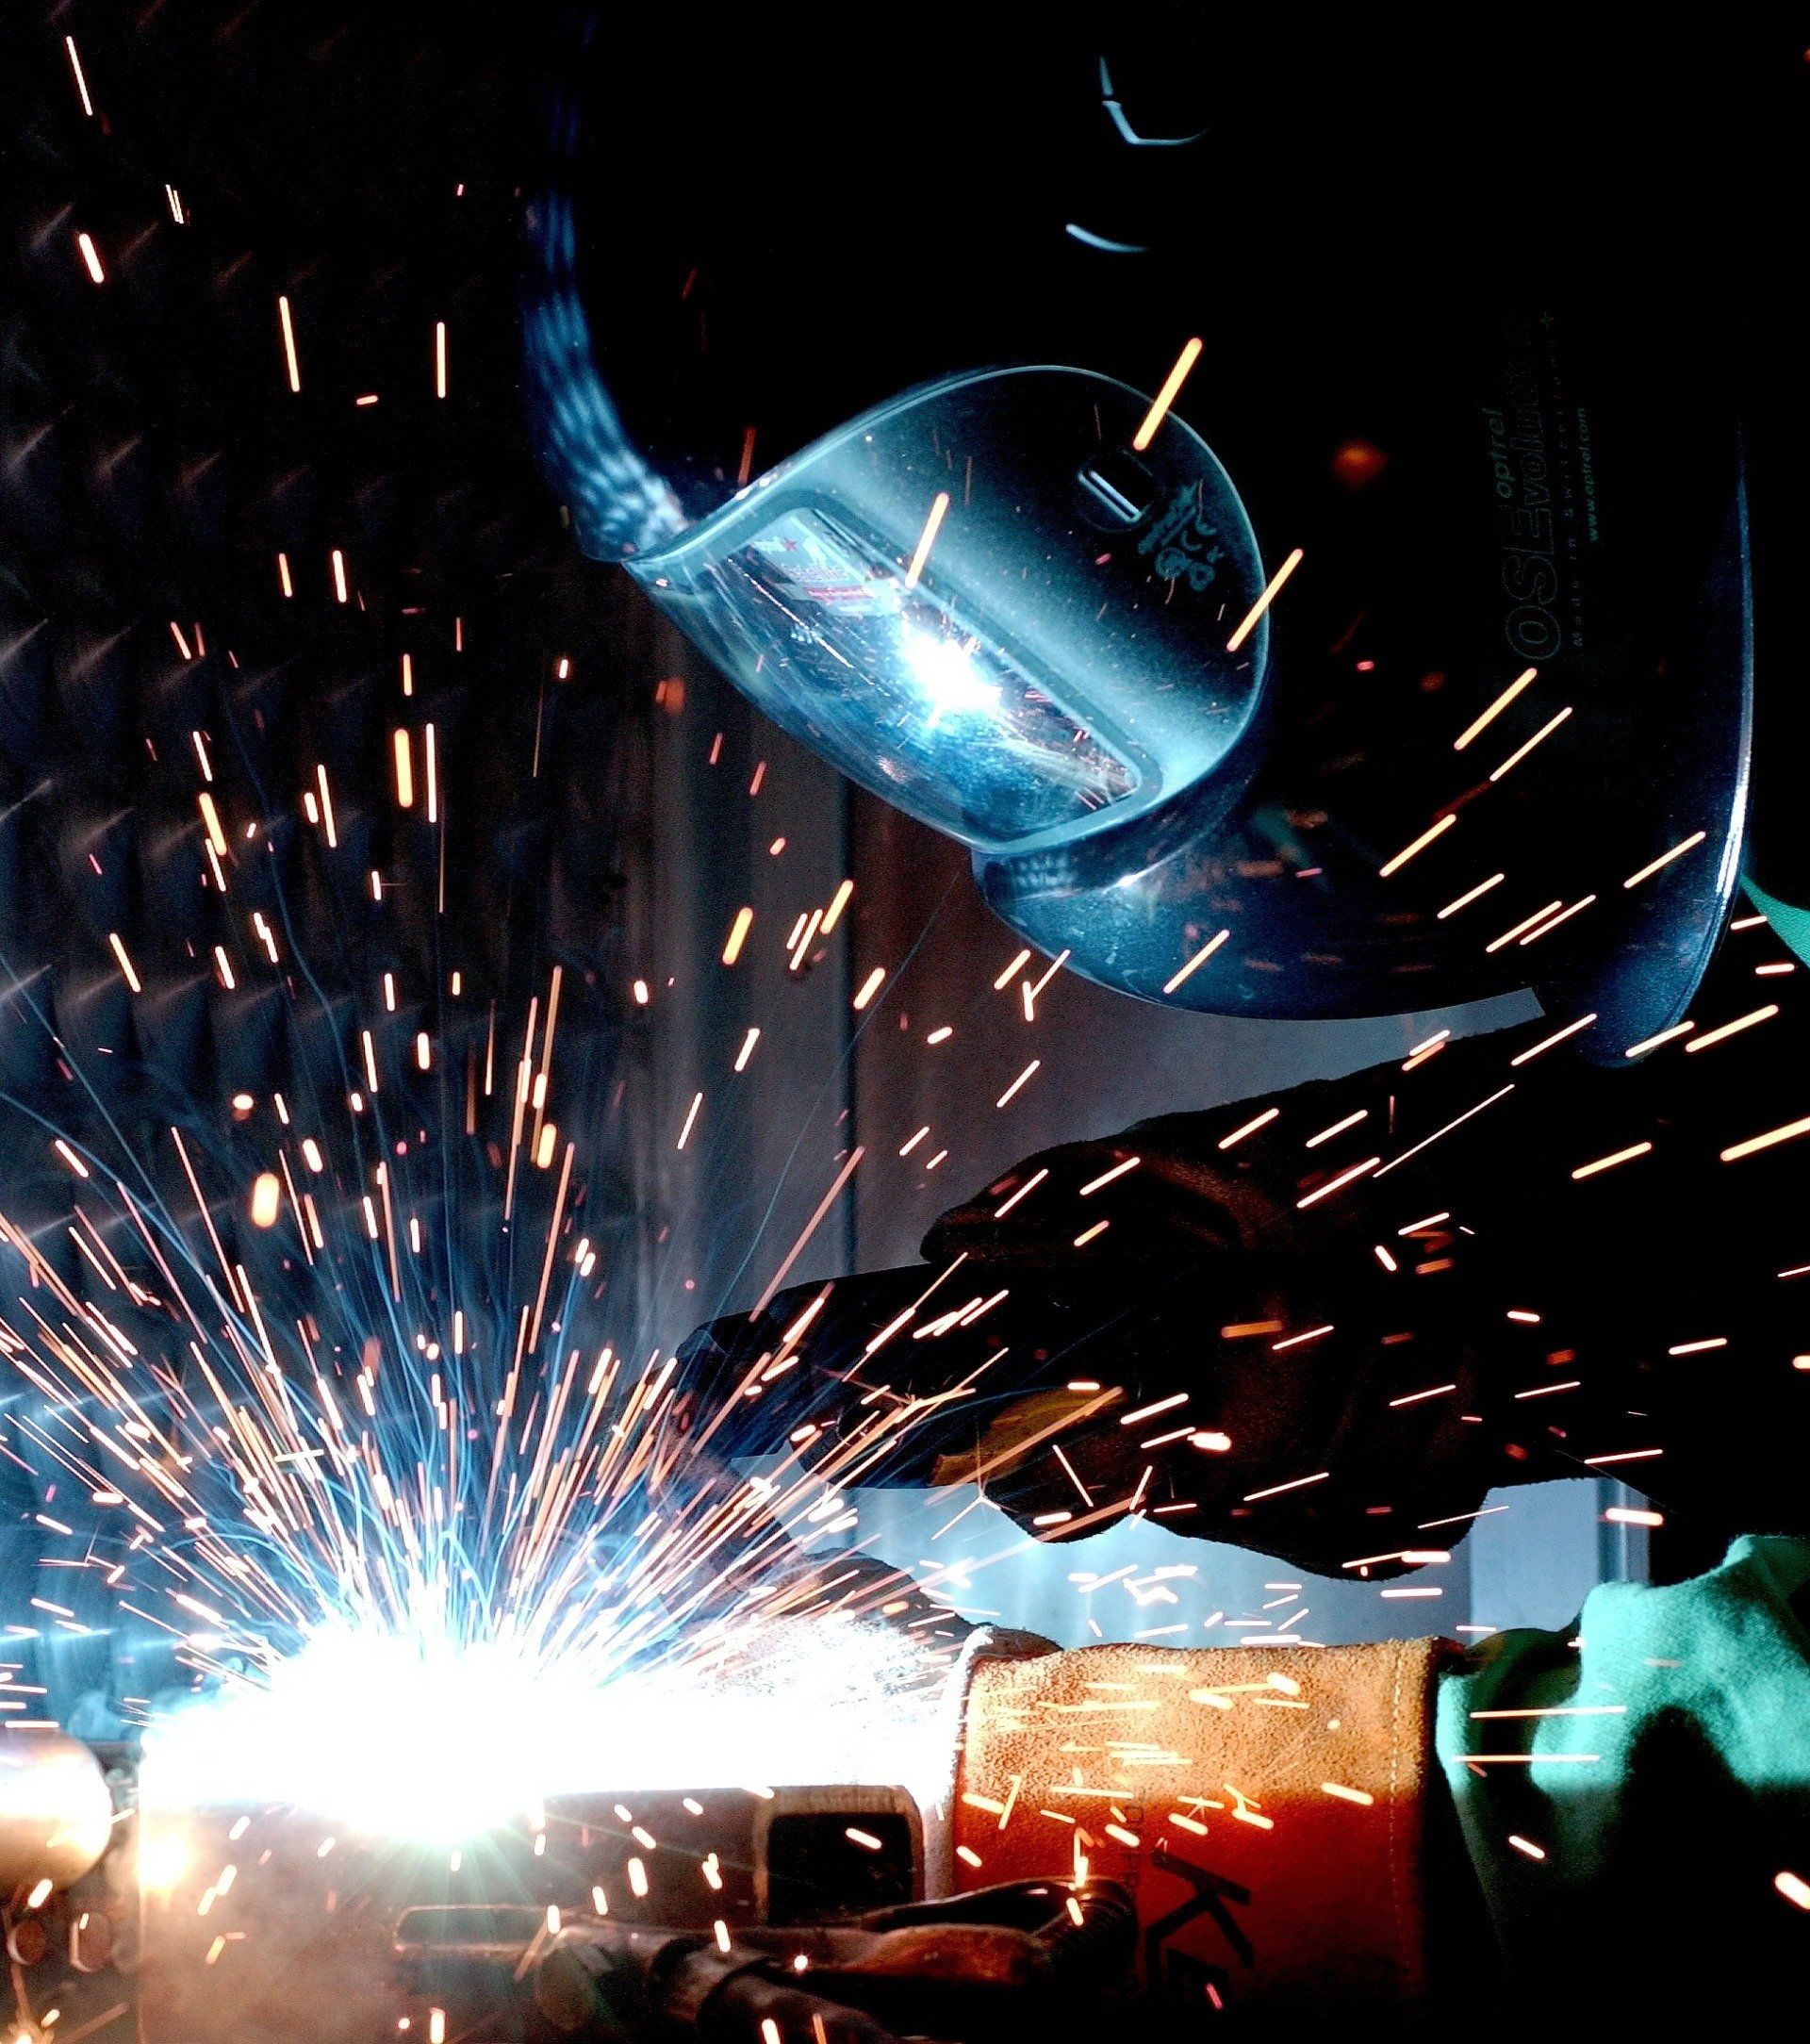 close up of welder welding with sparks flying